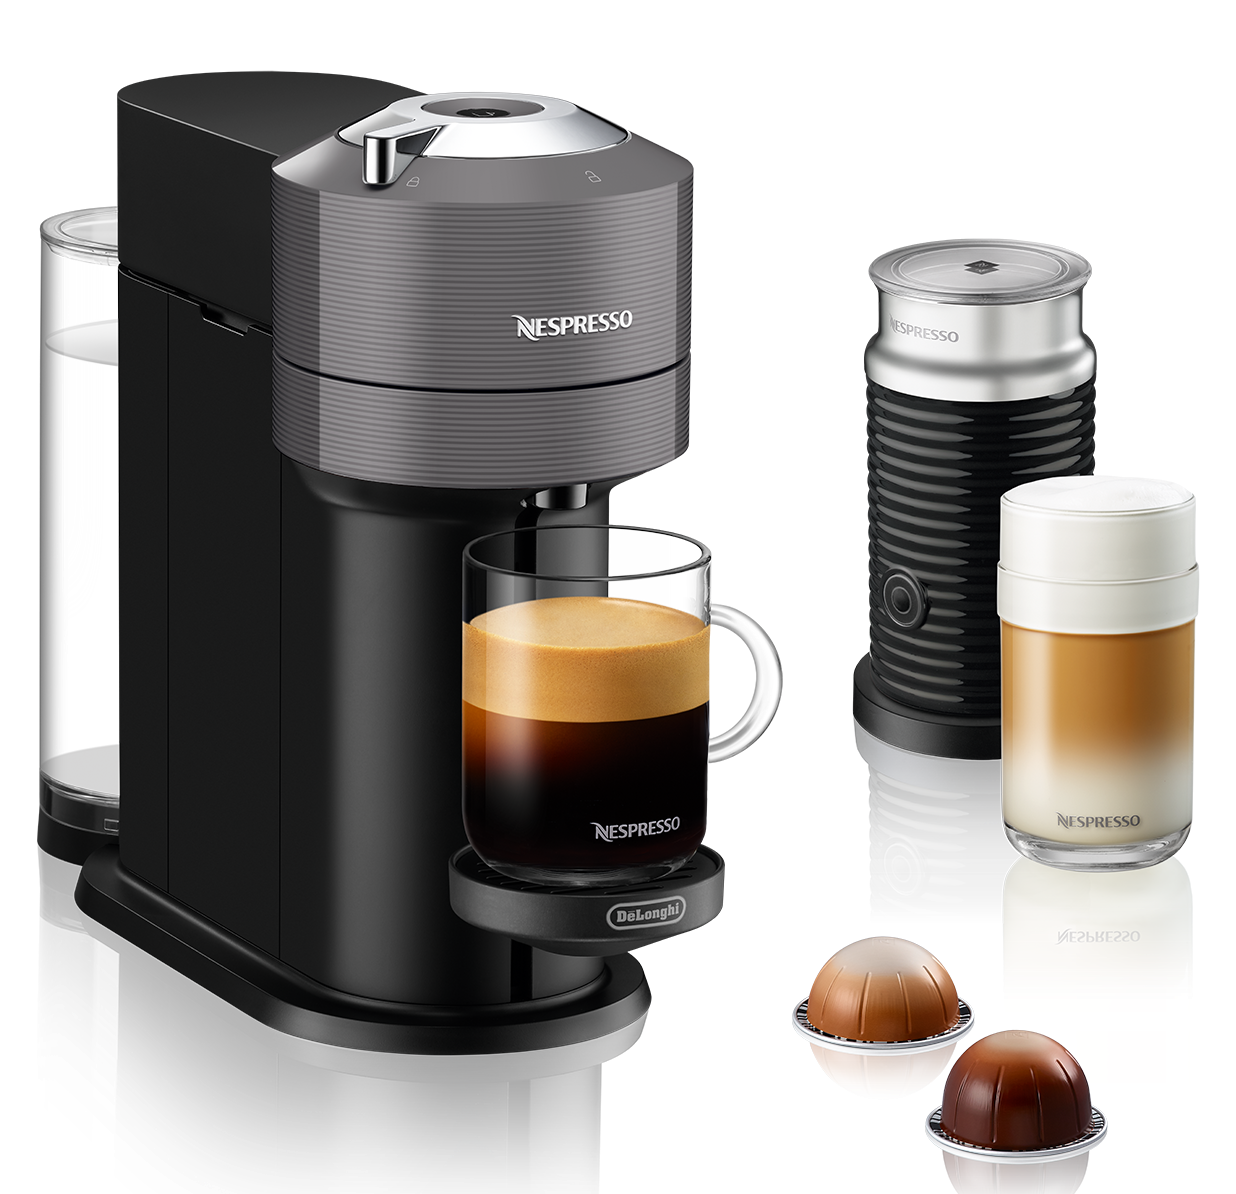 Nespresso Vertuo Next Coffee and Espresso Machine by De'Longhi with Milk Frother